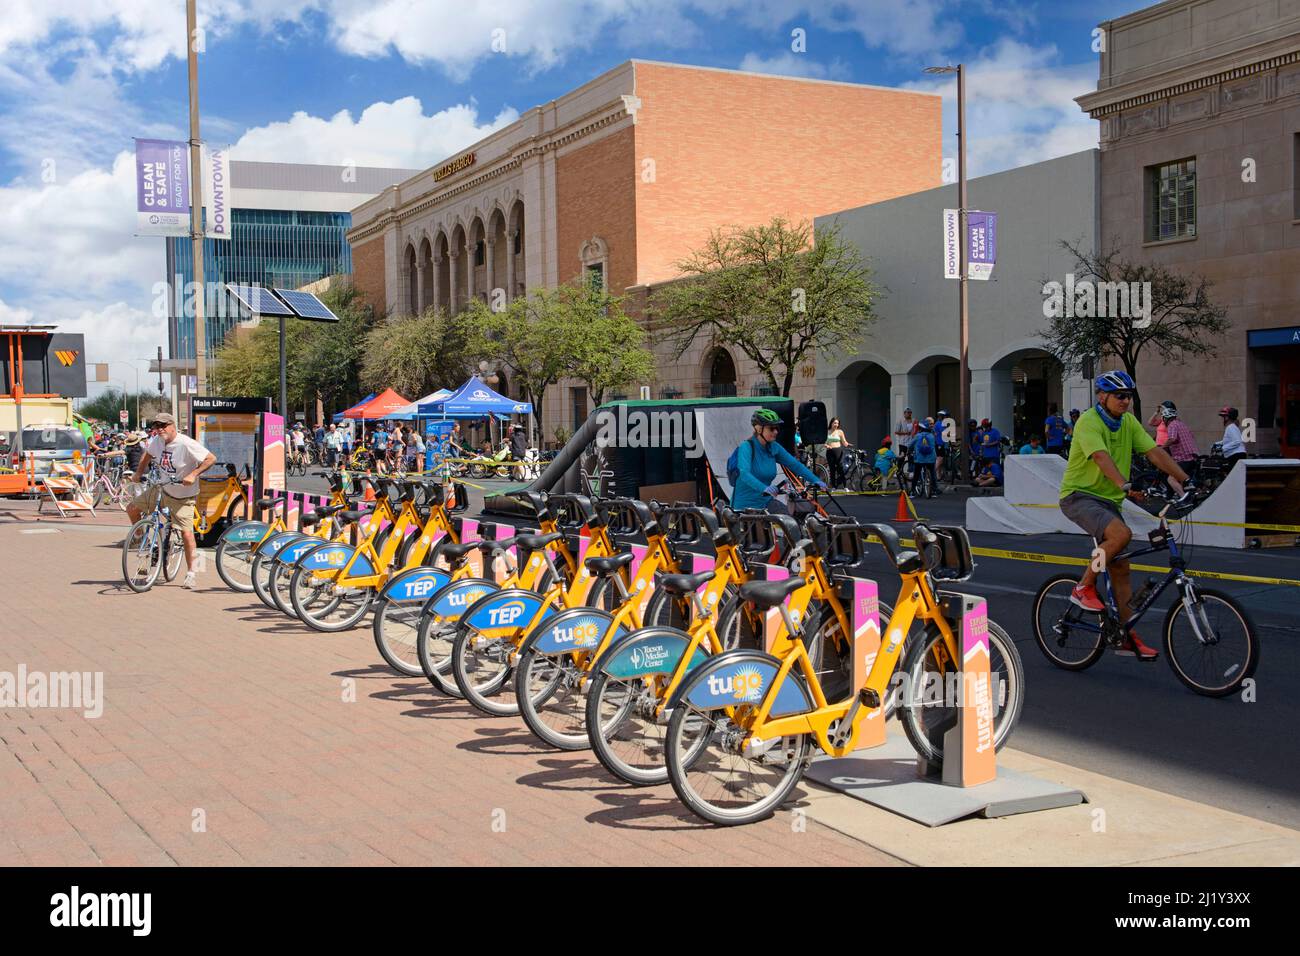 Rental bicycle station in downtown Tucson during the Cyclovia Sunday event where cyclists get to ride around the city Stock Photo